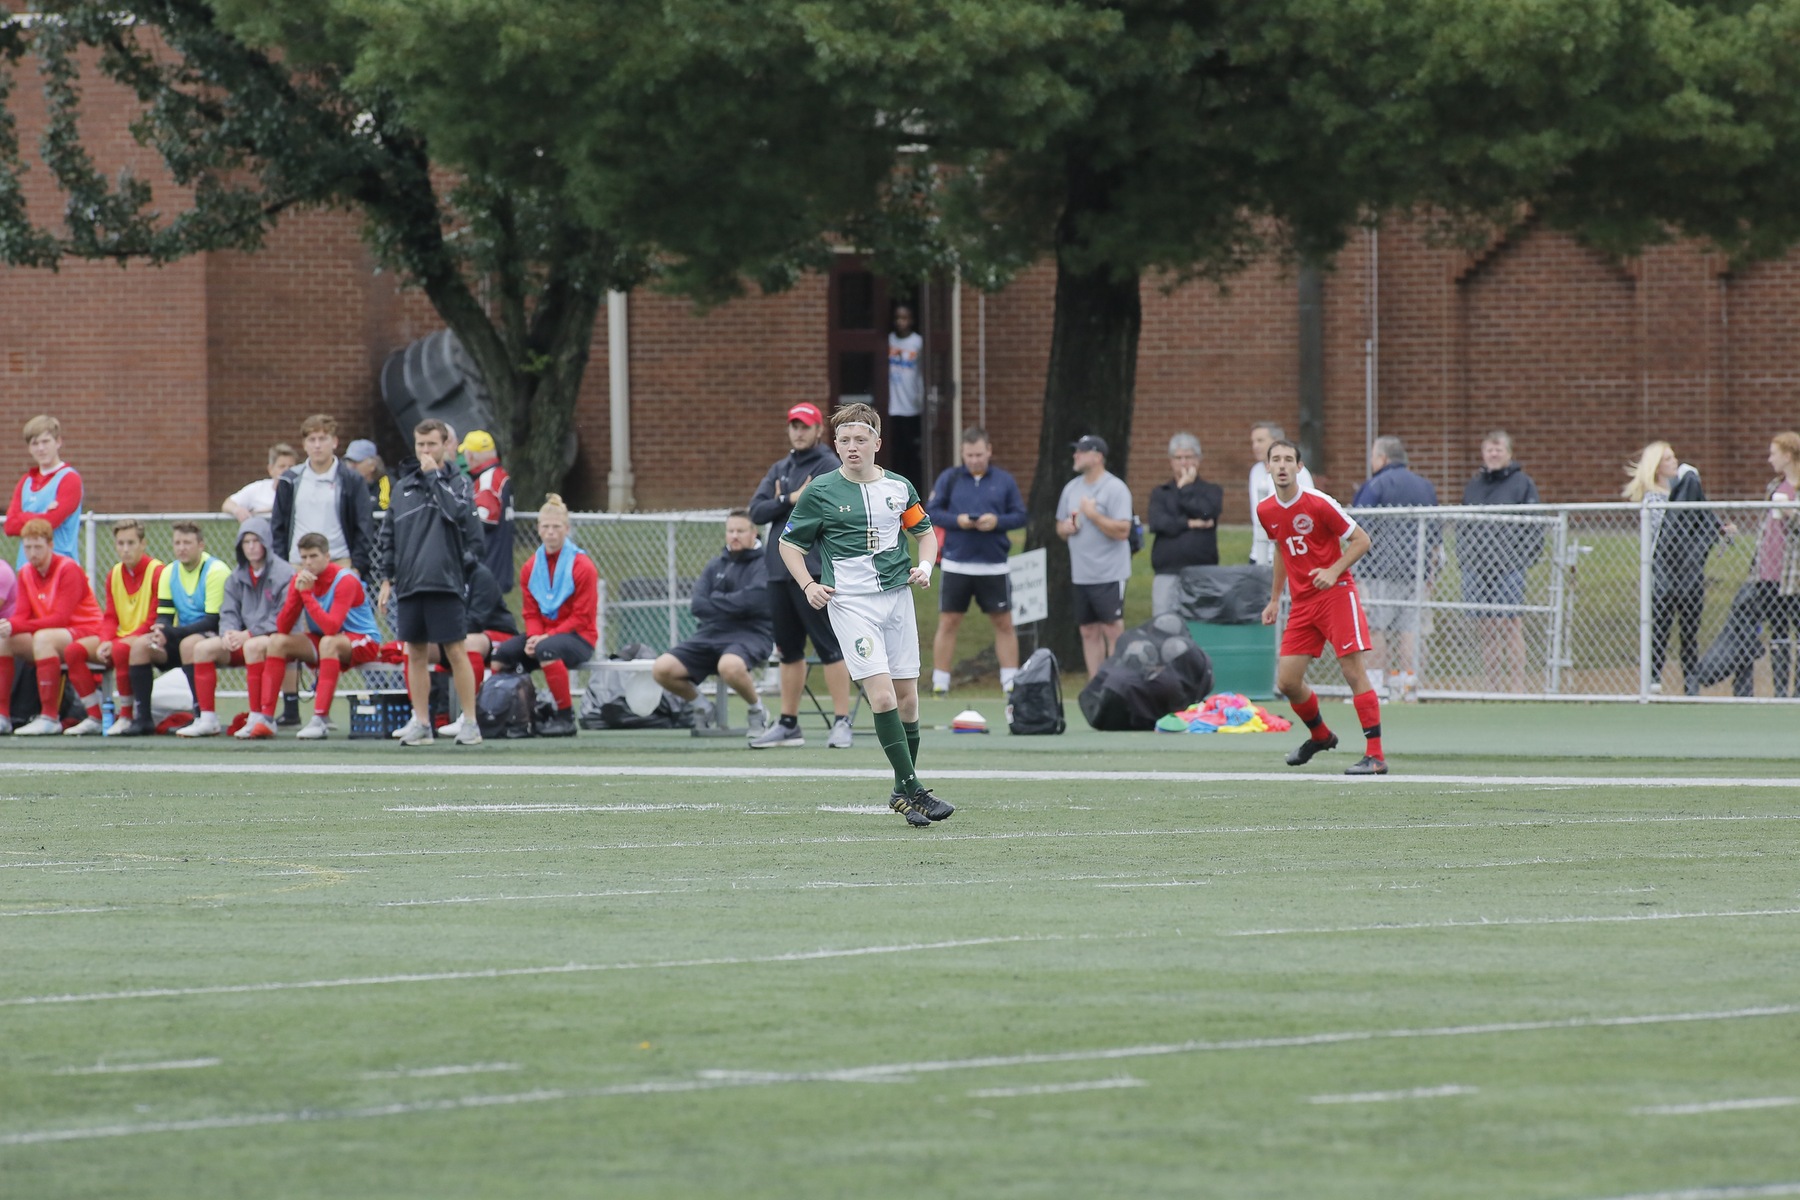 O'Donnell's Overtime Goal Pushes Bethany Past Alfred St.